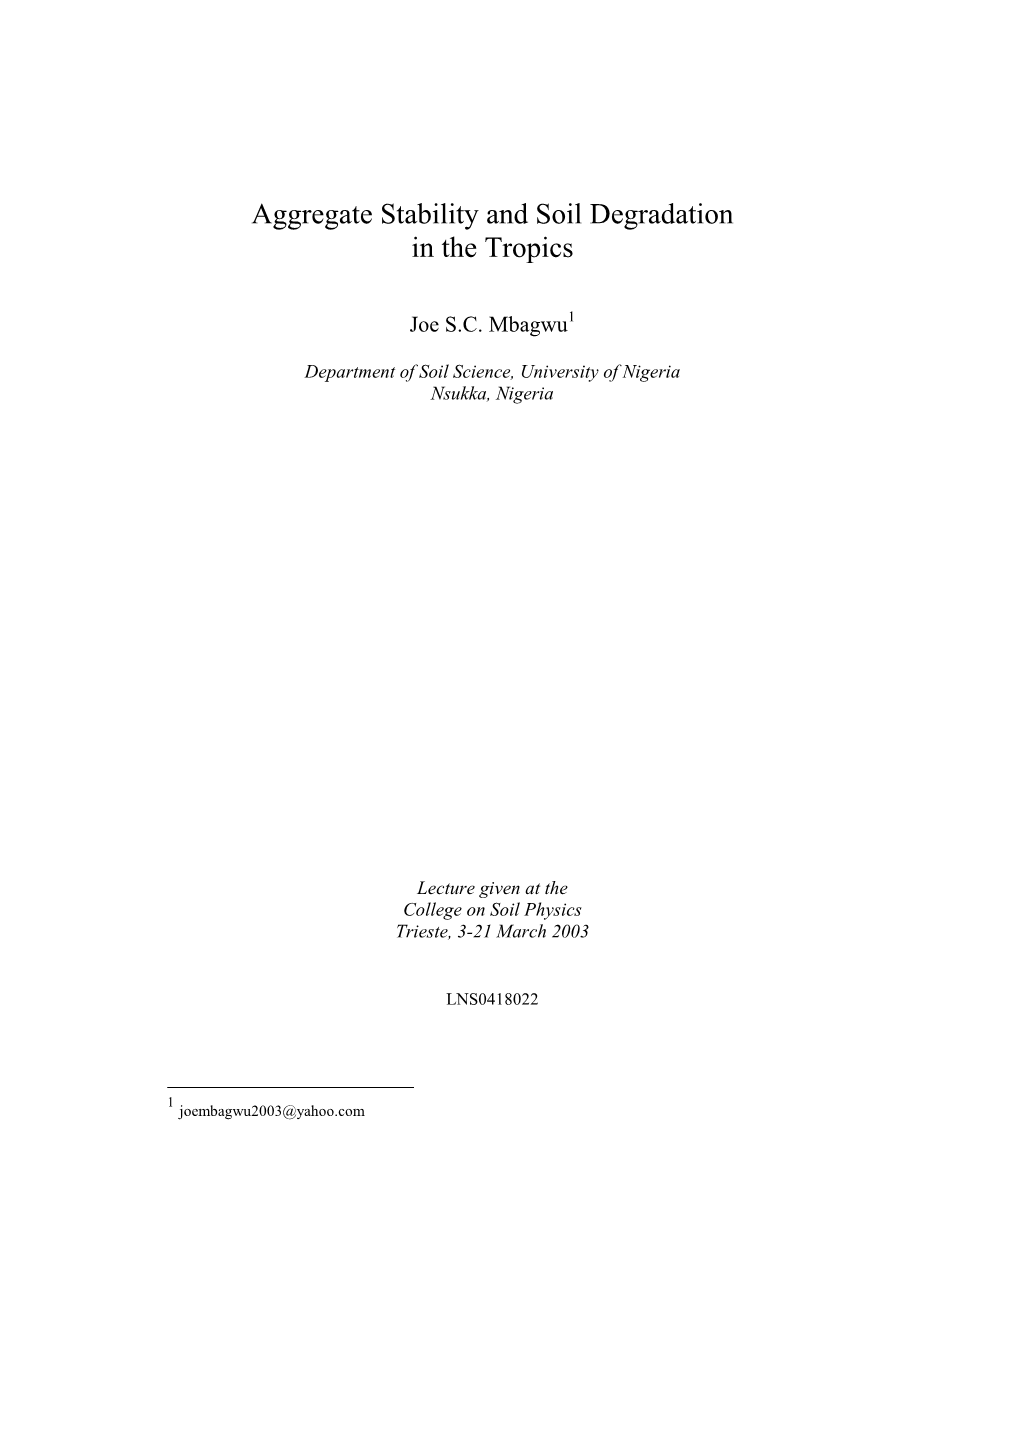 Aggregate Stability and Soil Degradation in the Tropics